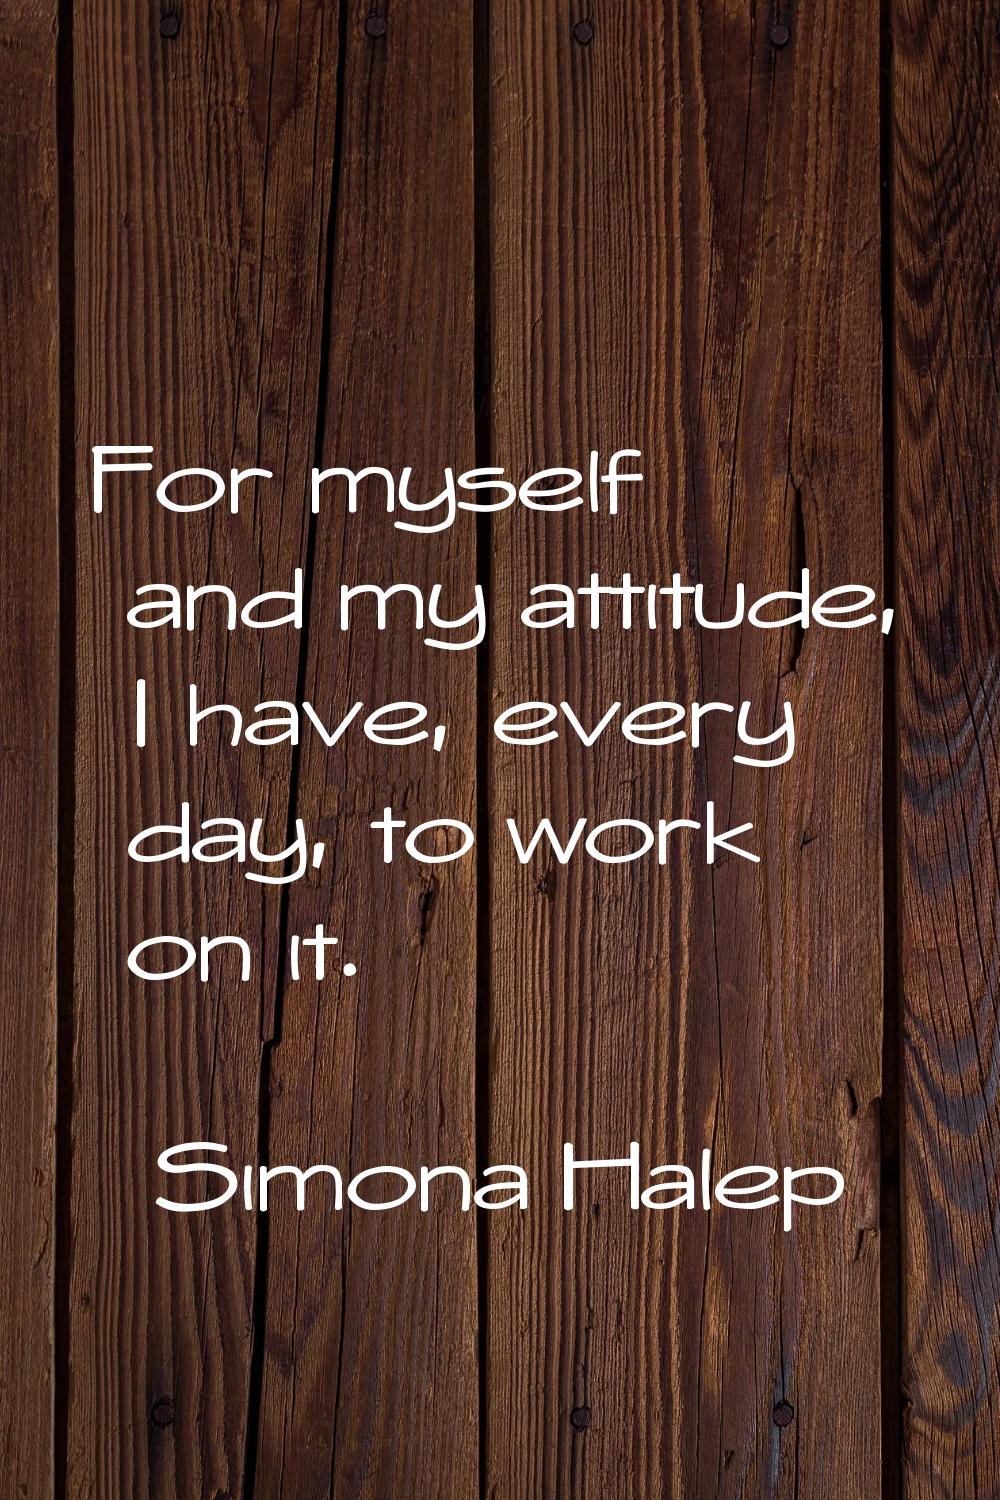 For myself and my attitude, I have, every day, to work on it.